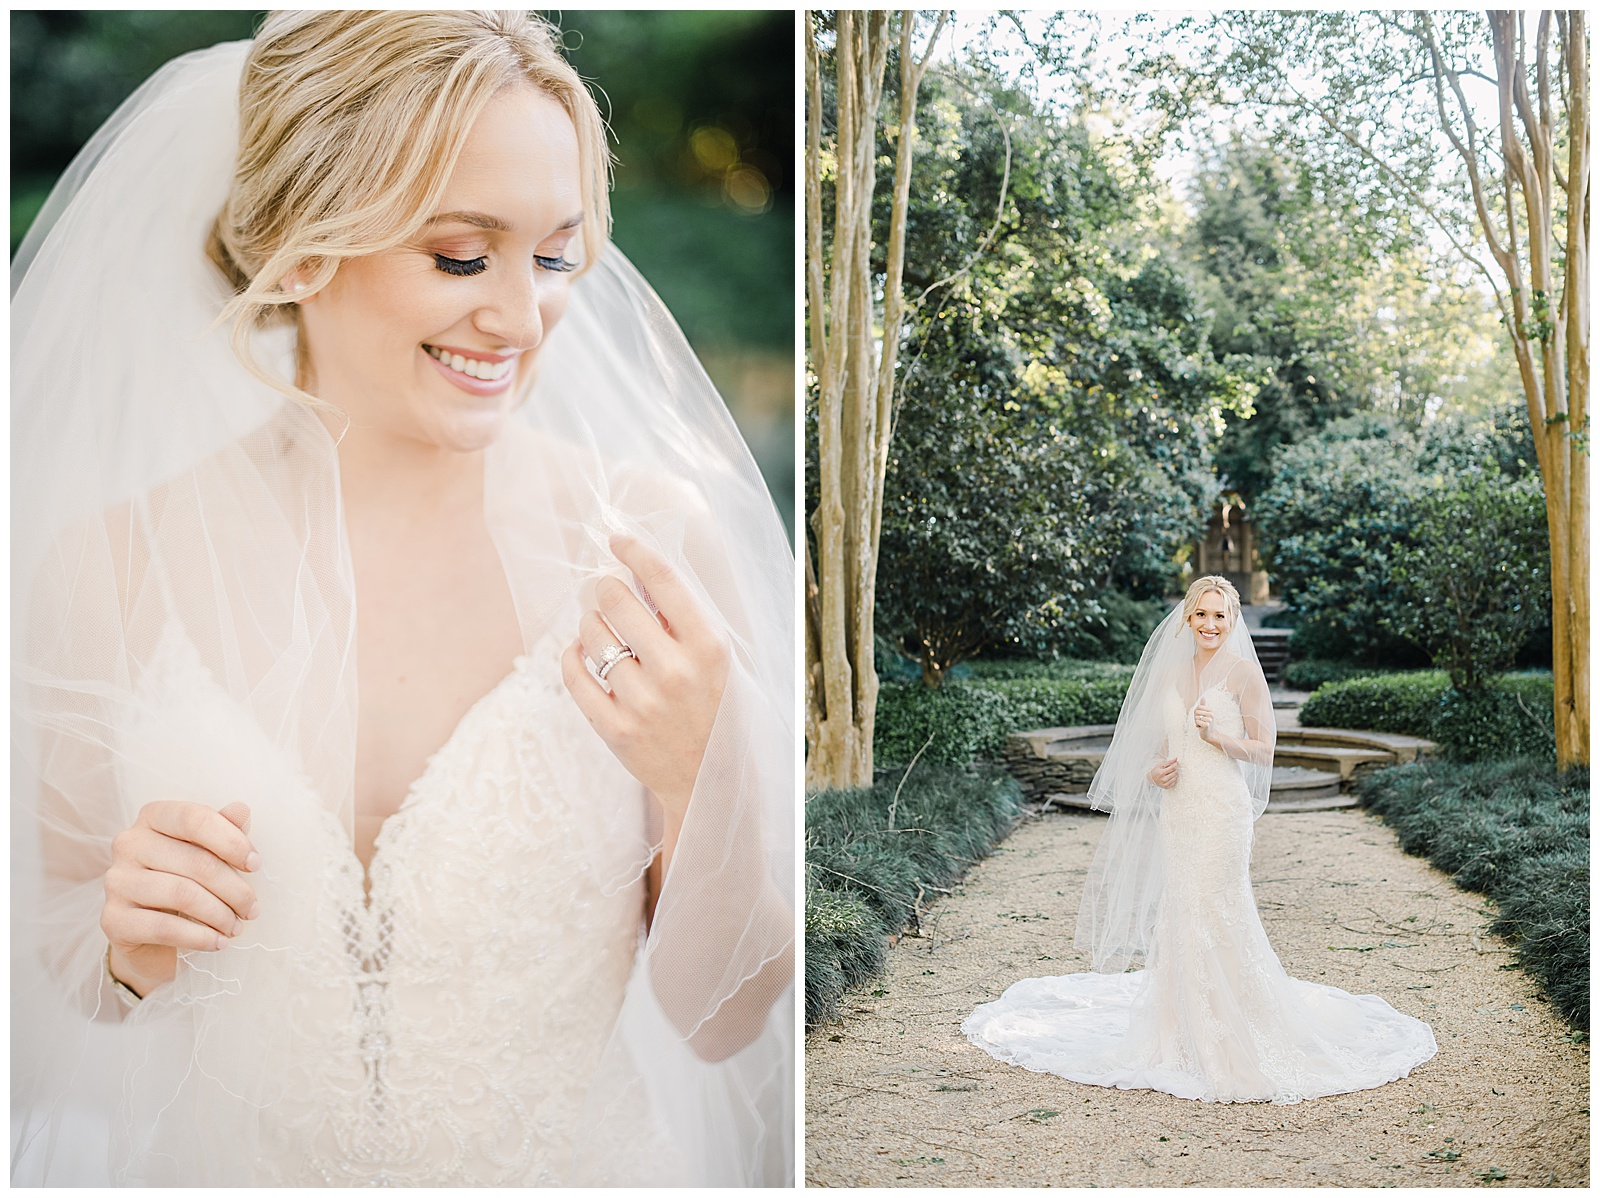 New Orleans Wedding Photographer Chelsea Rousey Photography Smiling bride in wedding gown and veil